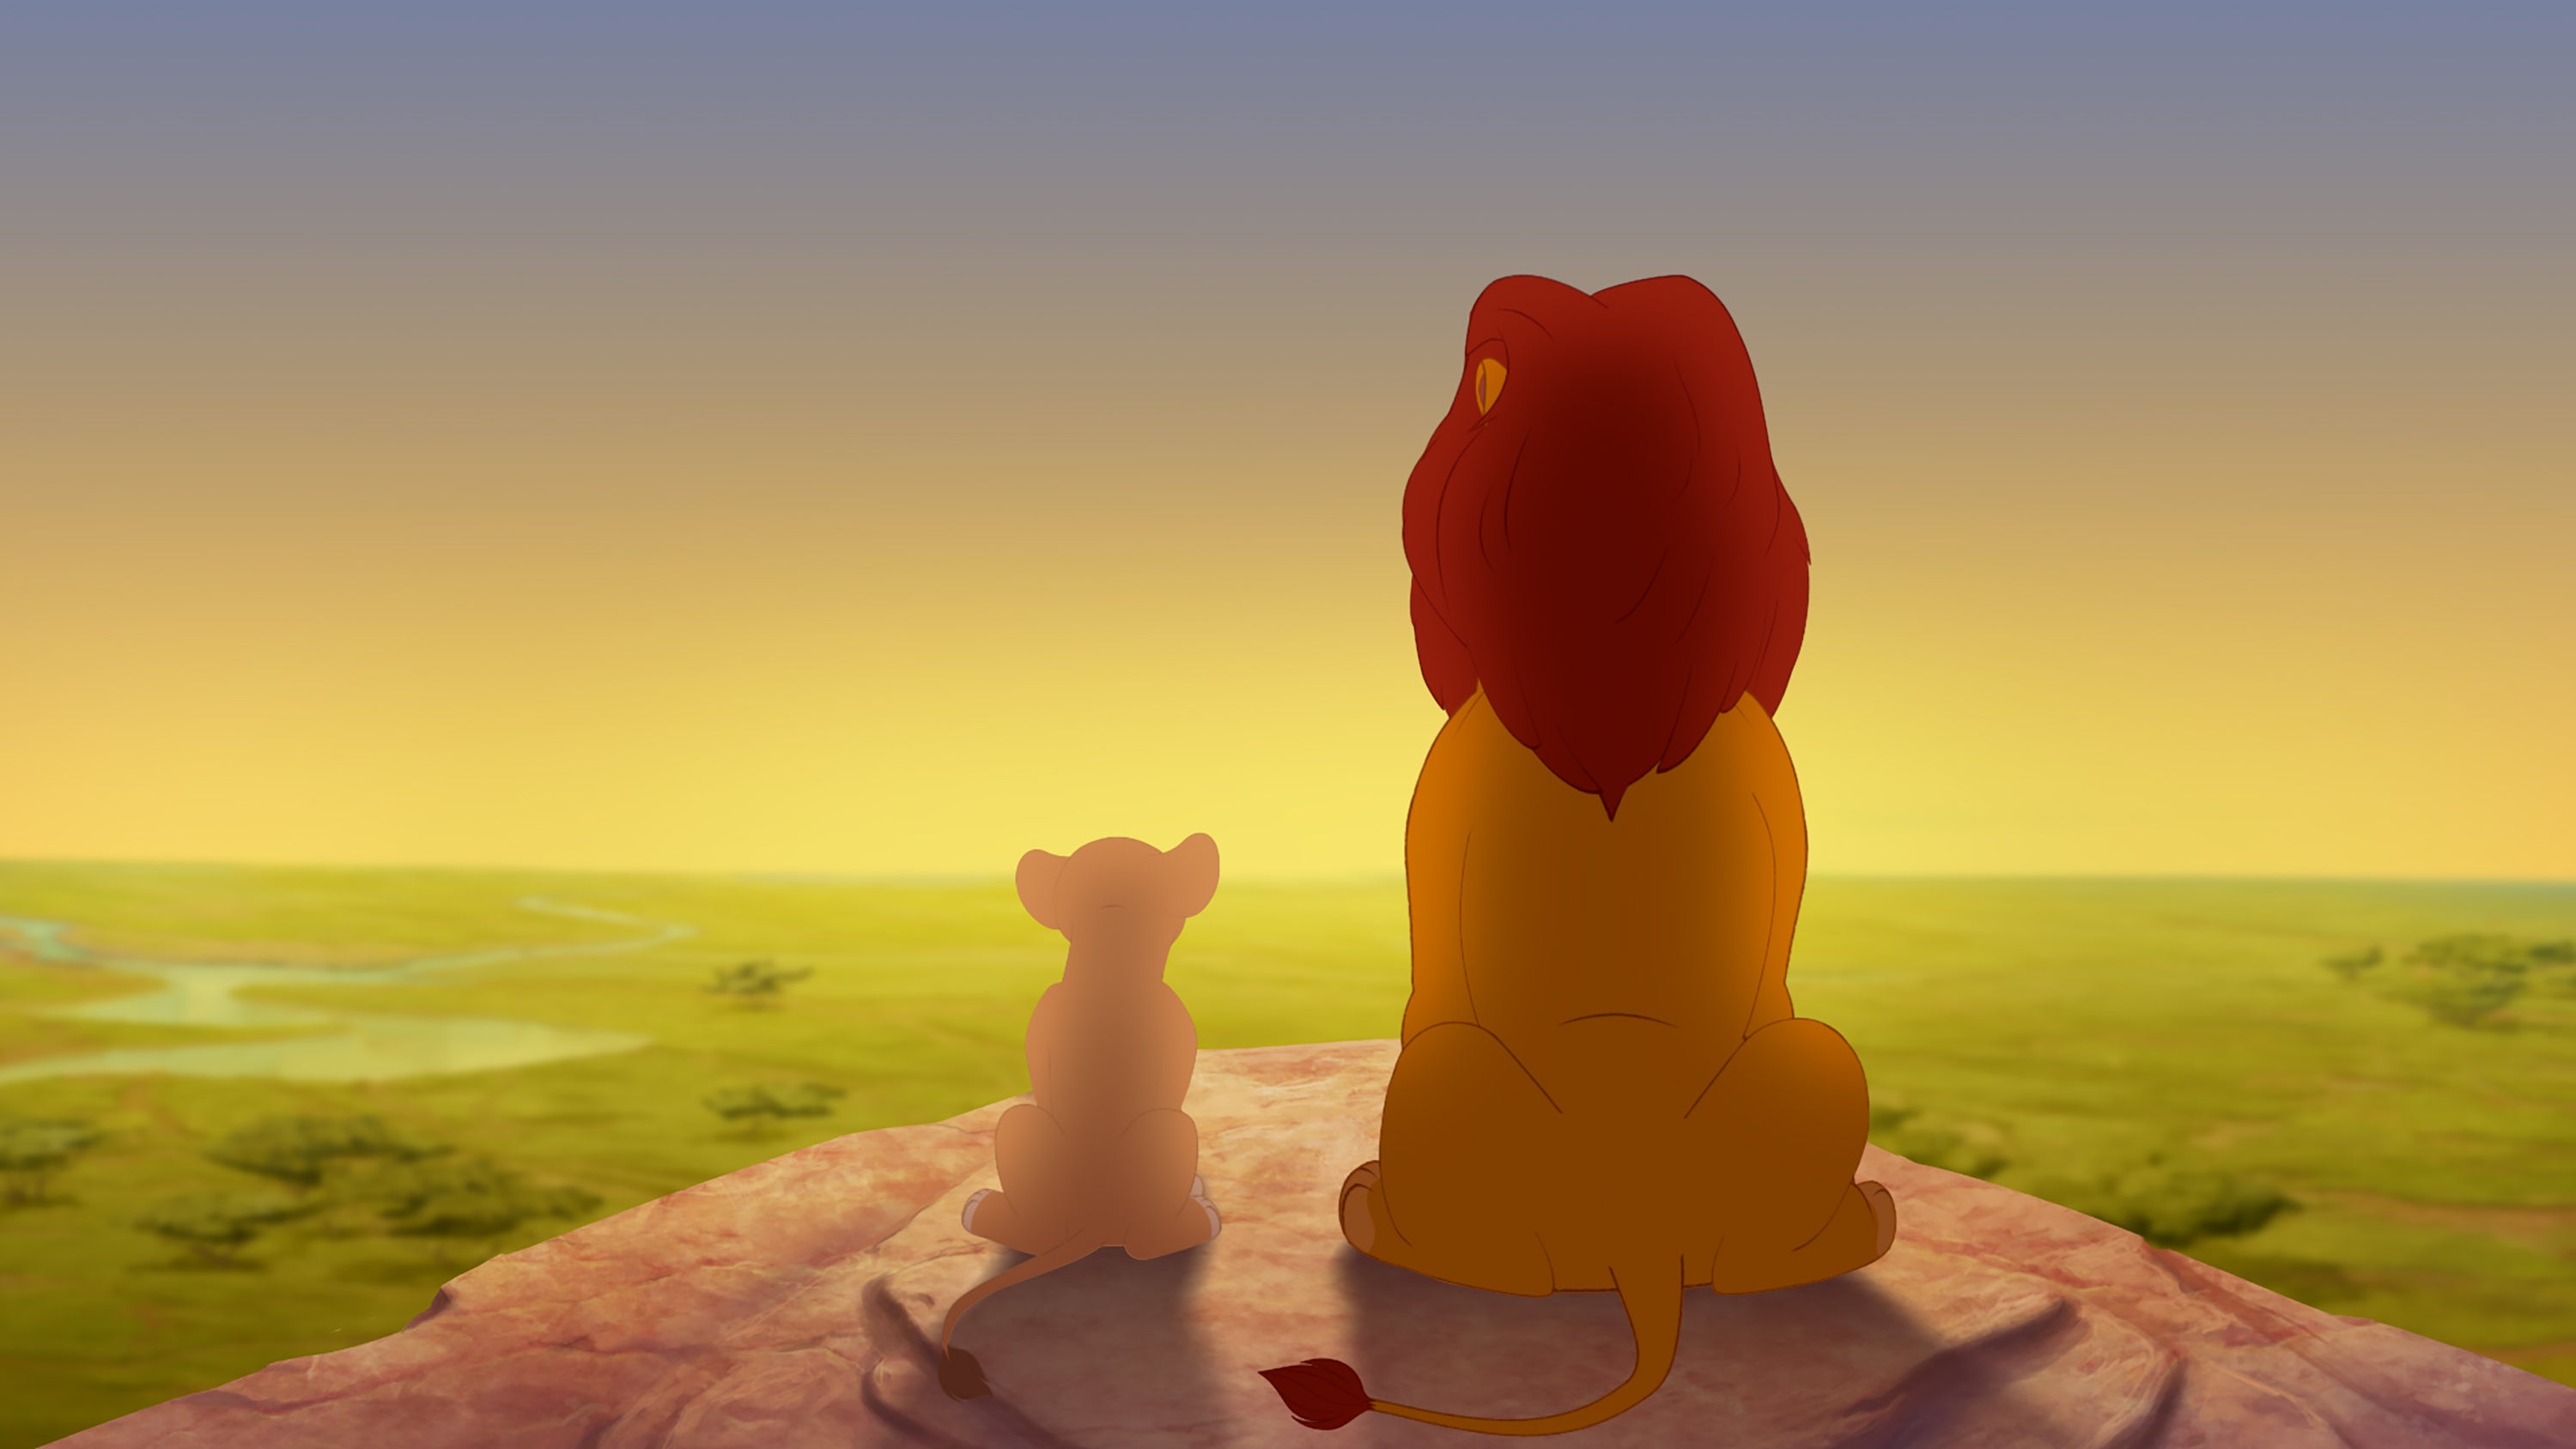 Disney's Next Live-Action Remake Is 'The Lion King' And We Can't Wait
